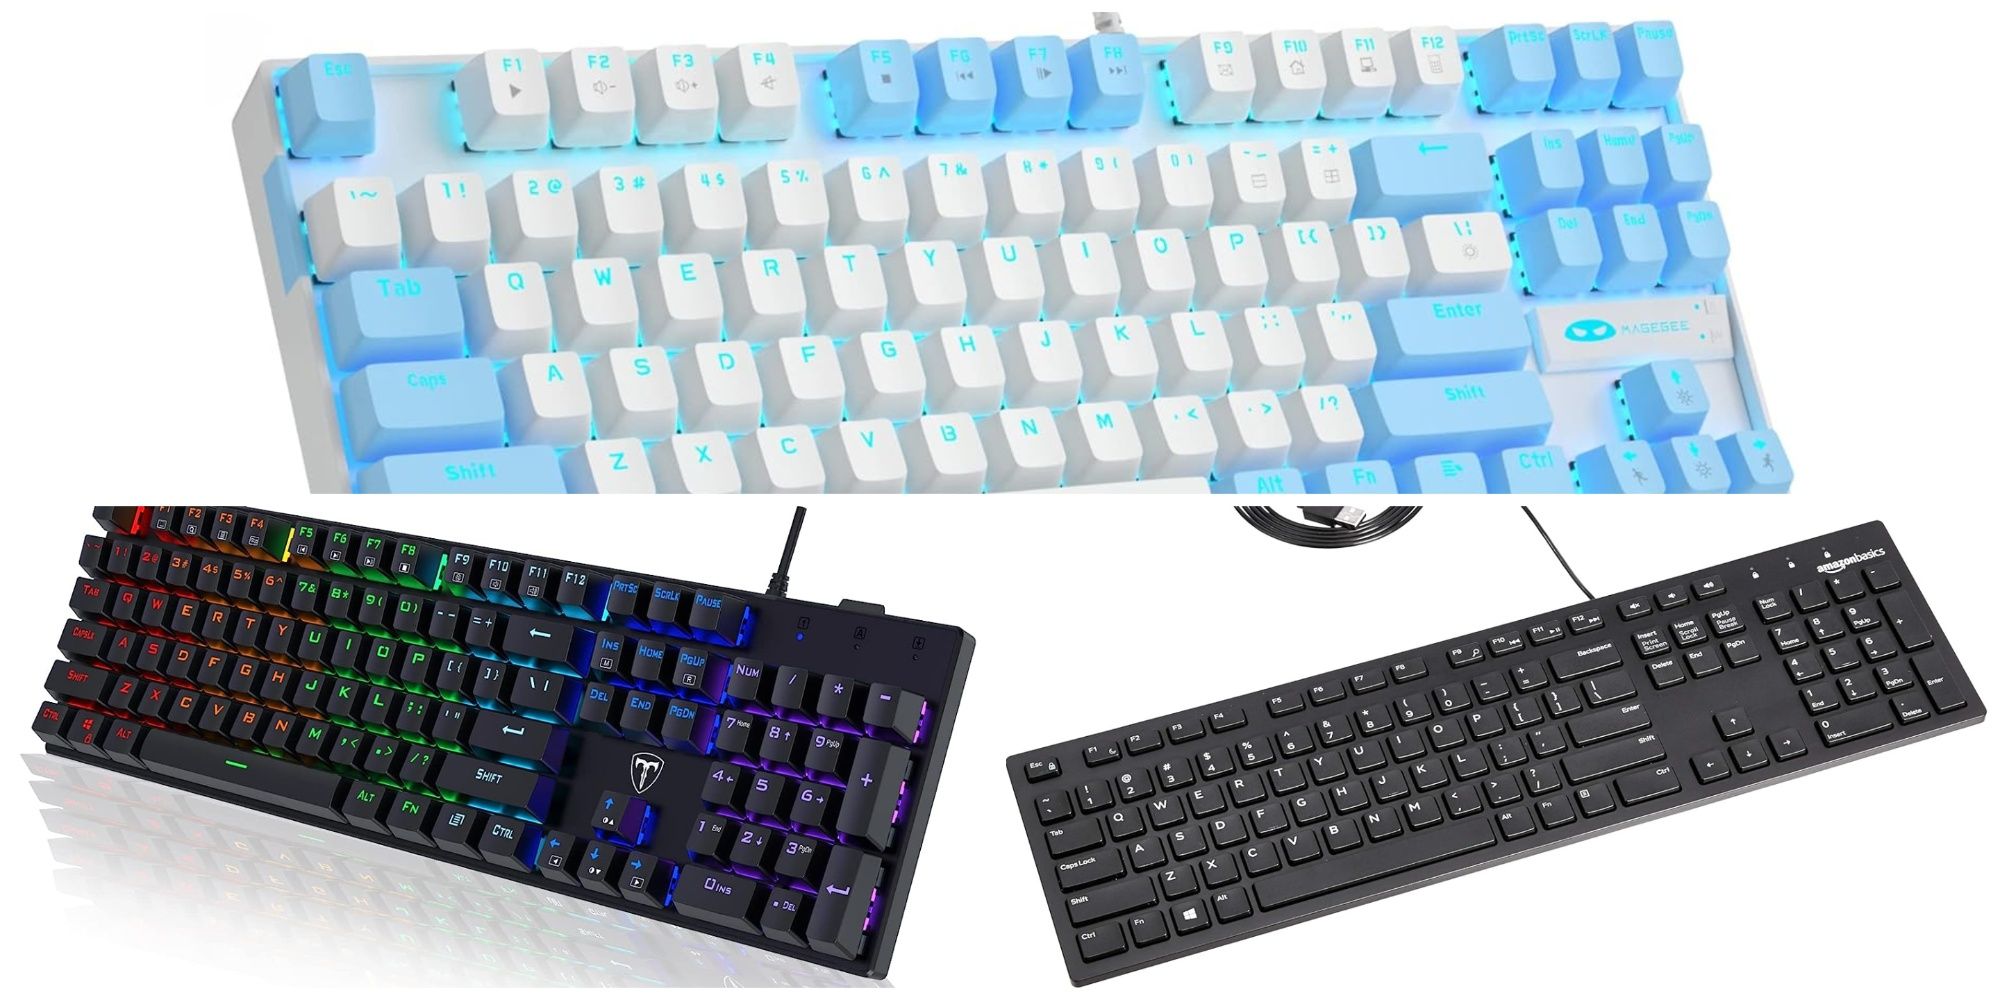 Three keyboards arranged in a pyramid: A RisoPhy in the bottom left, a white/blue MageGee on top, and an Amazon Basics on the bottom right.